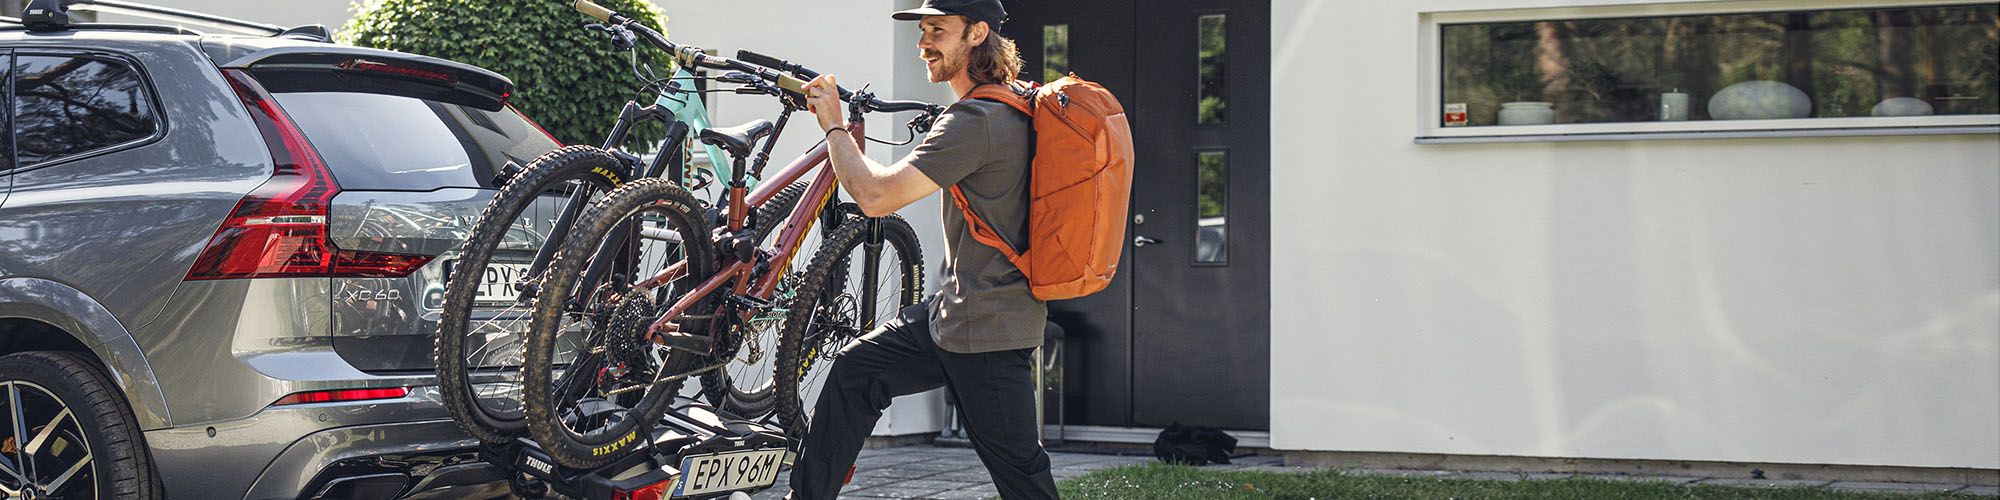 Man with an orange backpack lifts bikes onto hitch bike rack outside of a residential house.